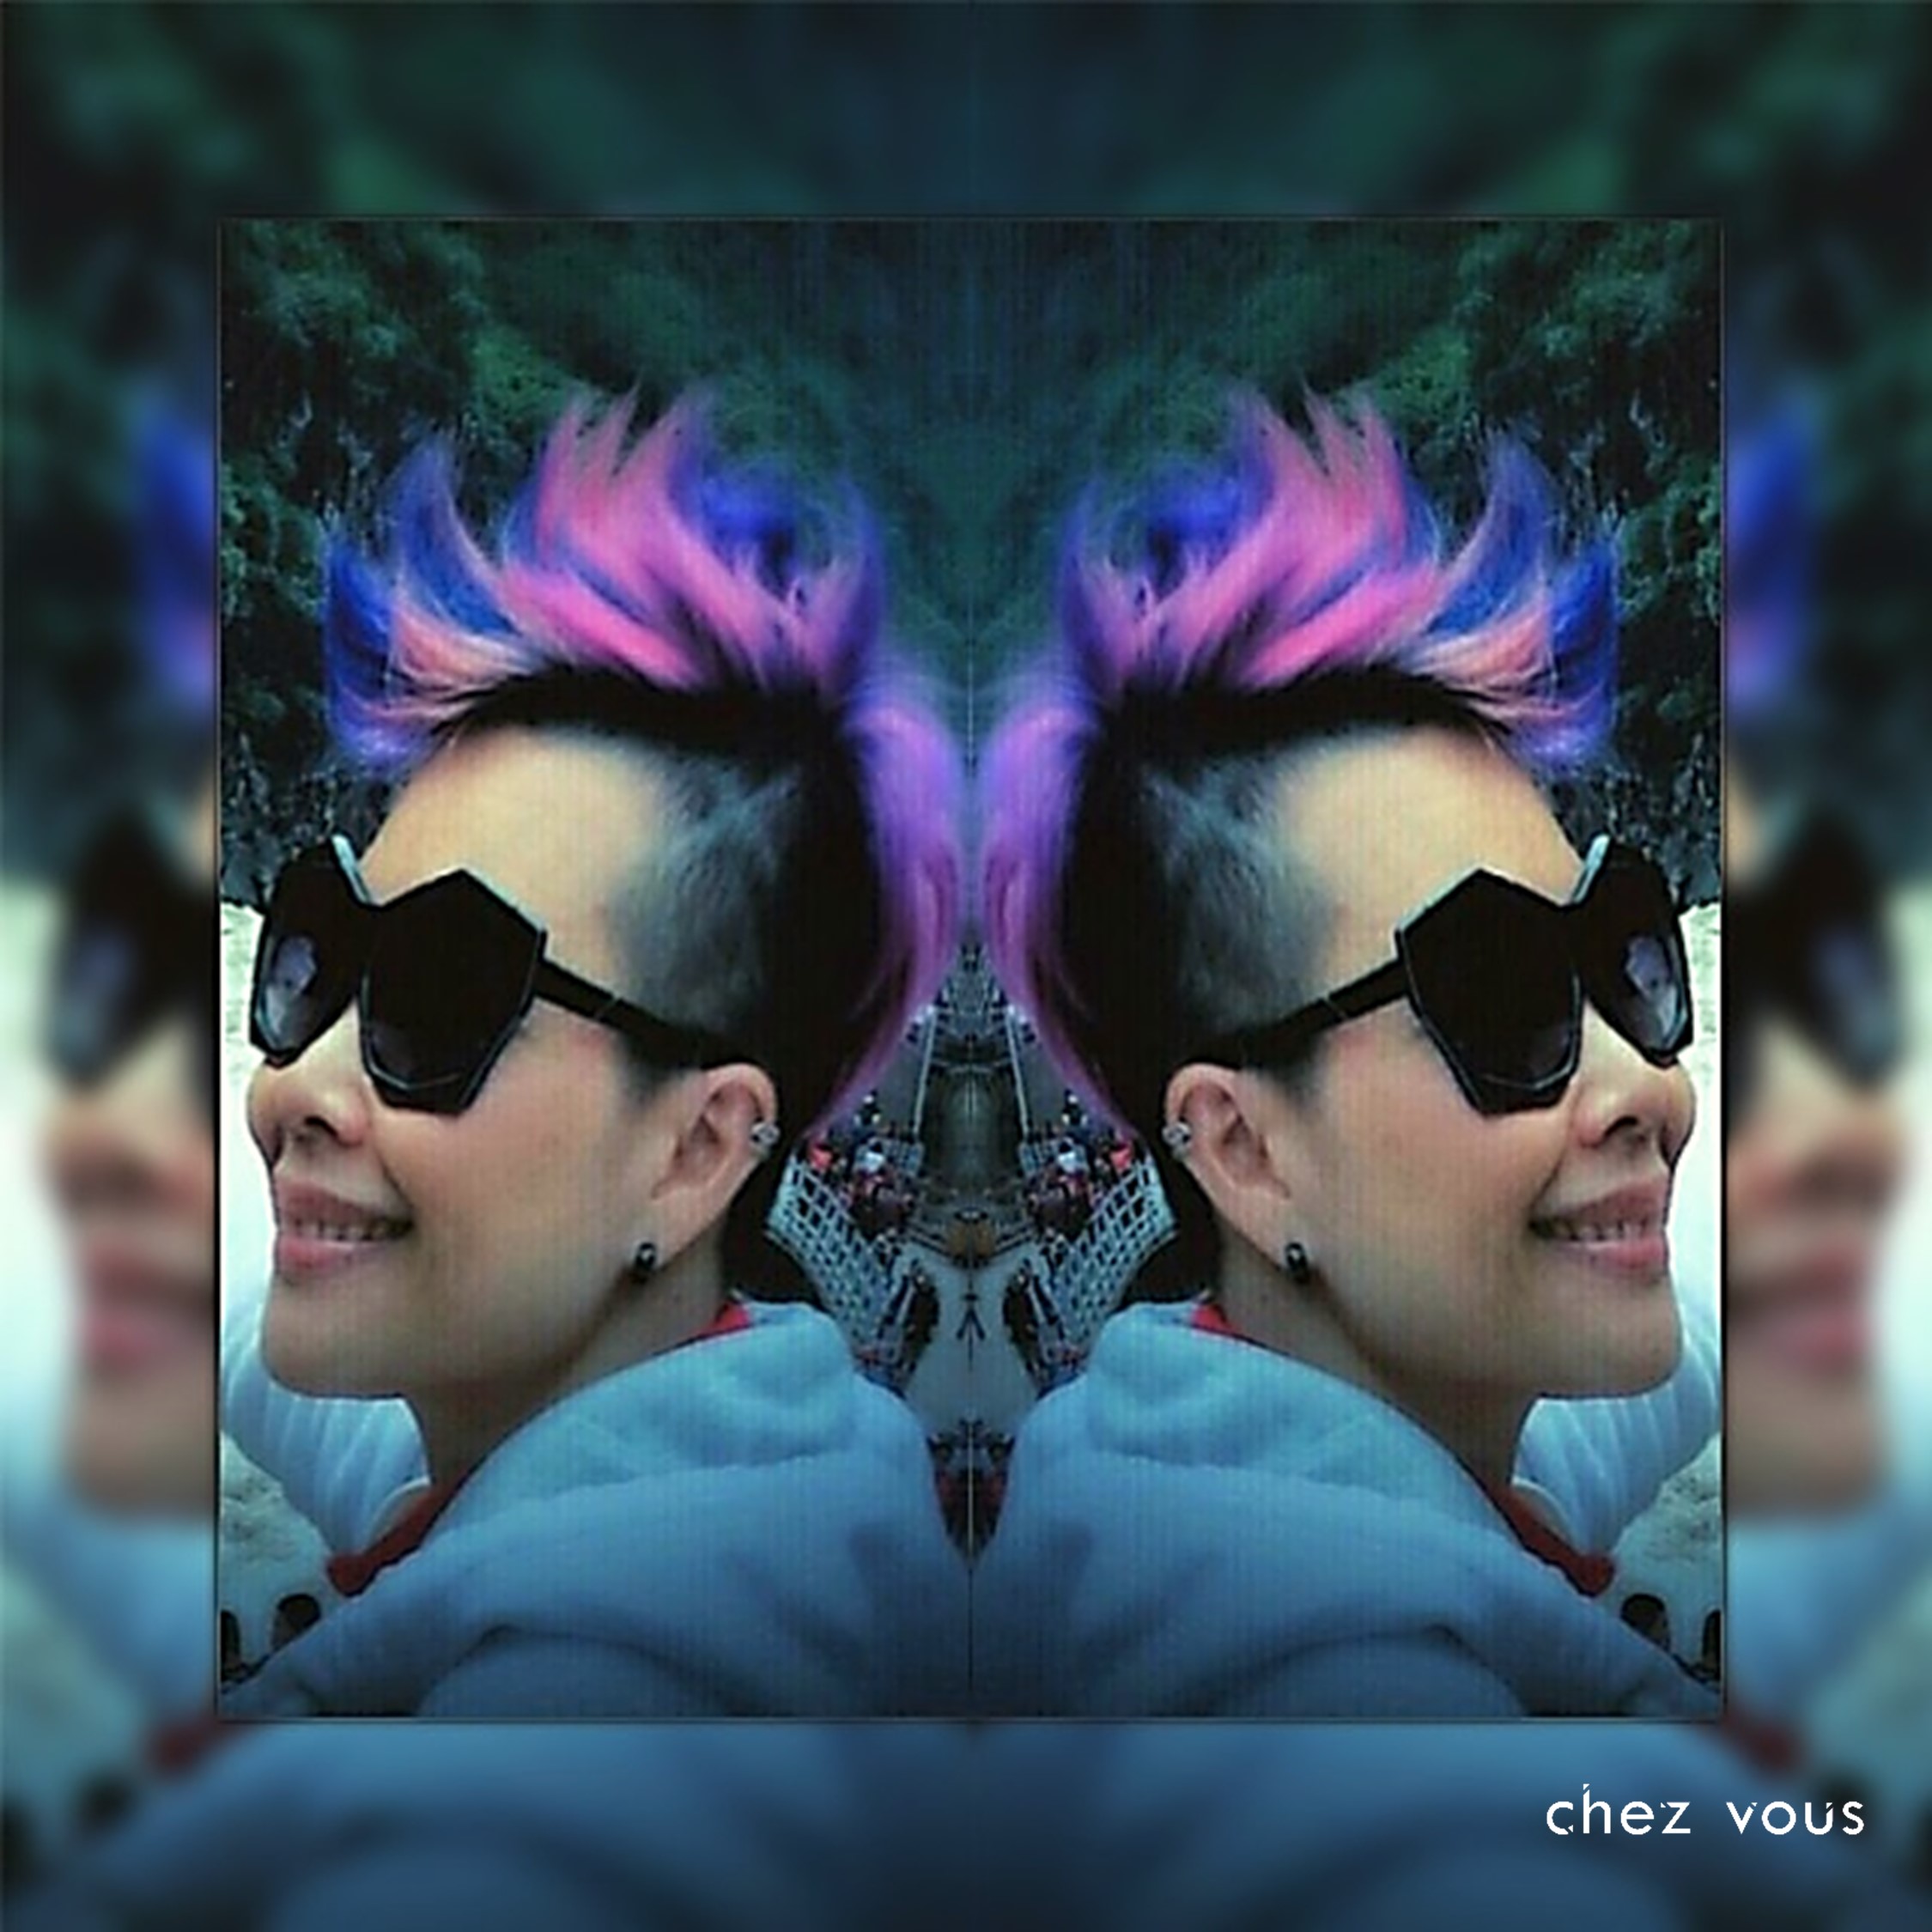 Done by Associate Salon Director of Chez Vous: Readen Chia | Design: Block Hair Colouring with Neon Pink and Shocking Blue